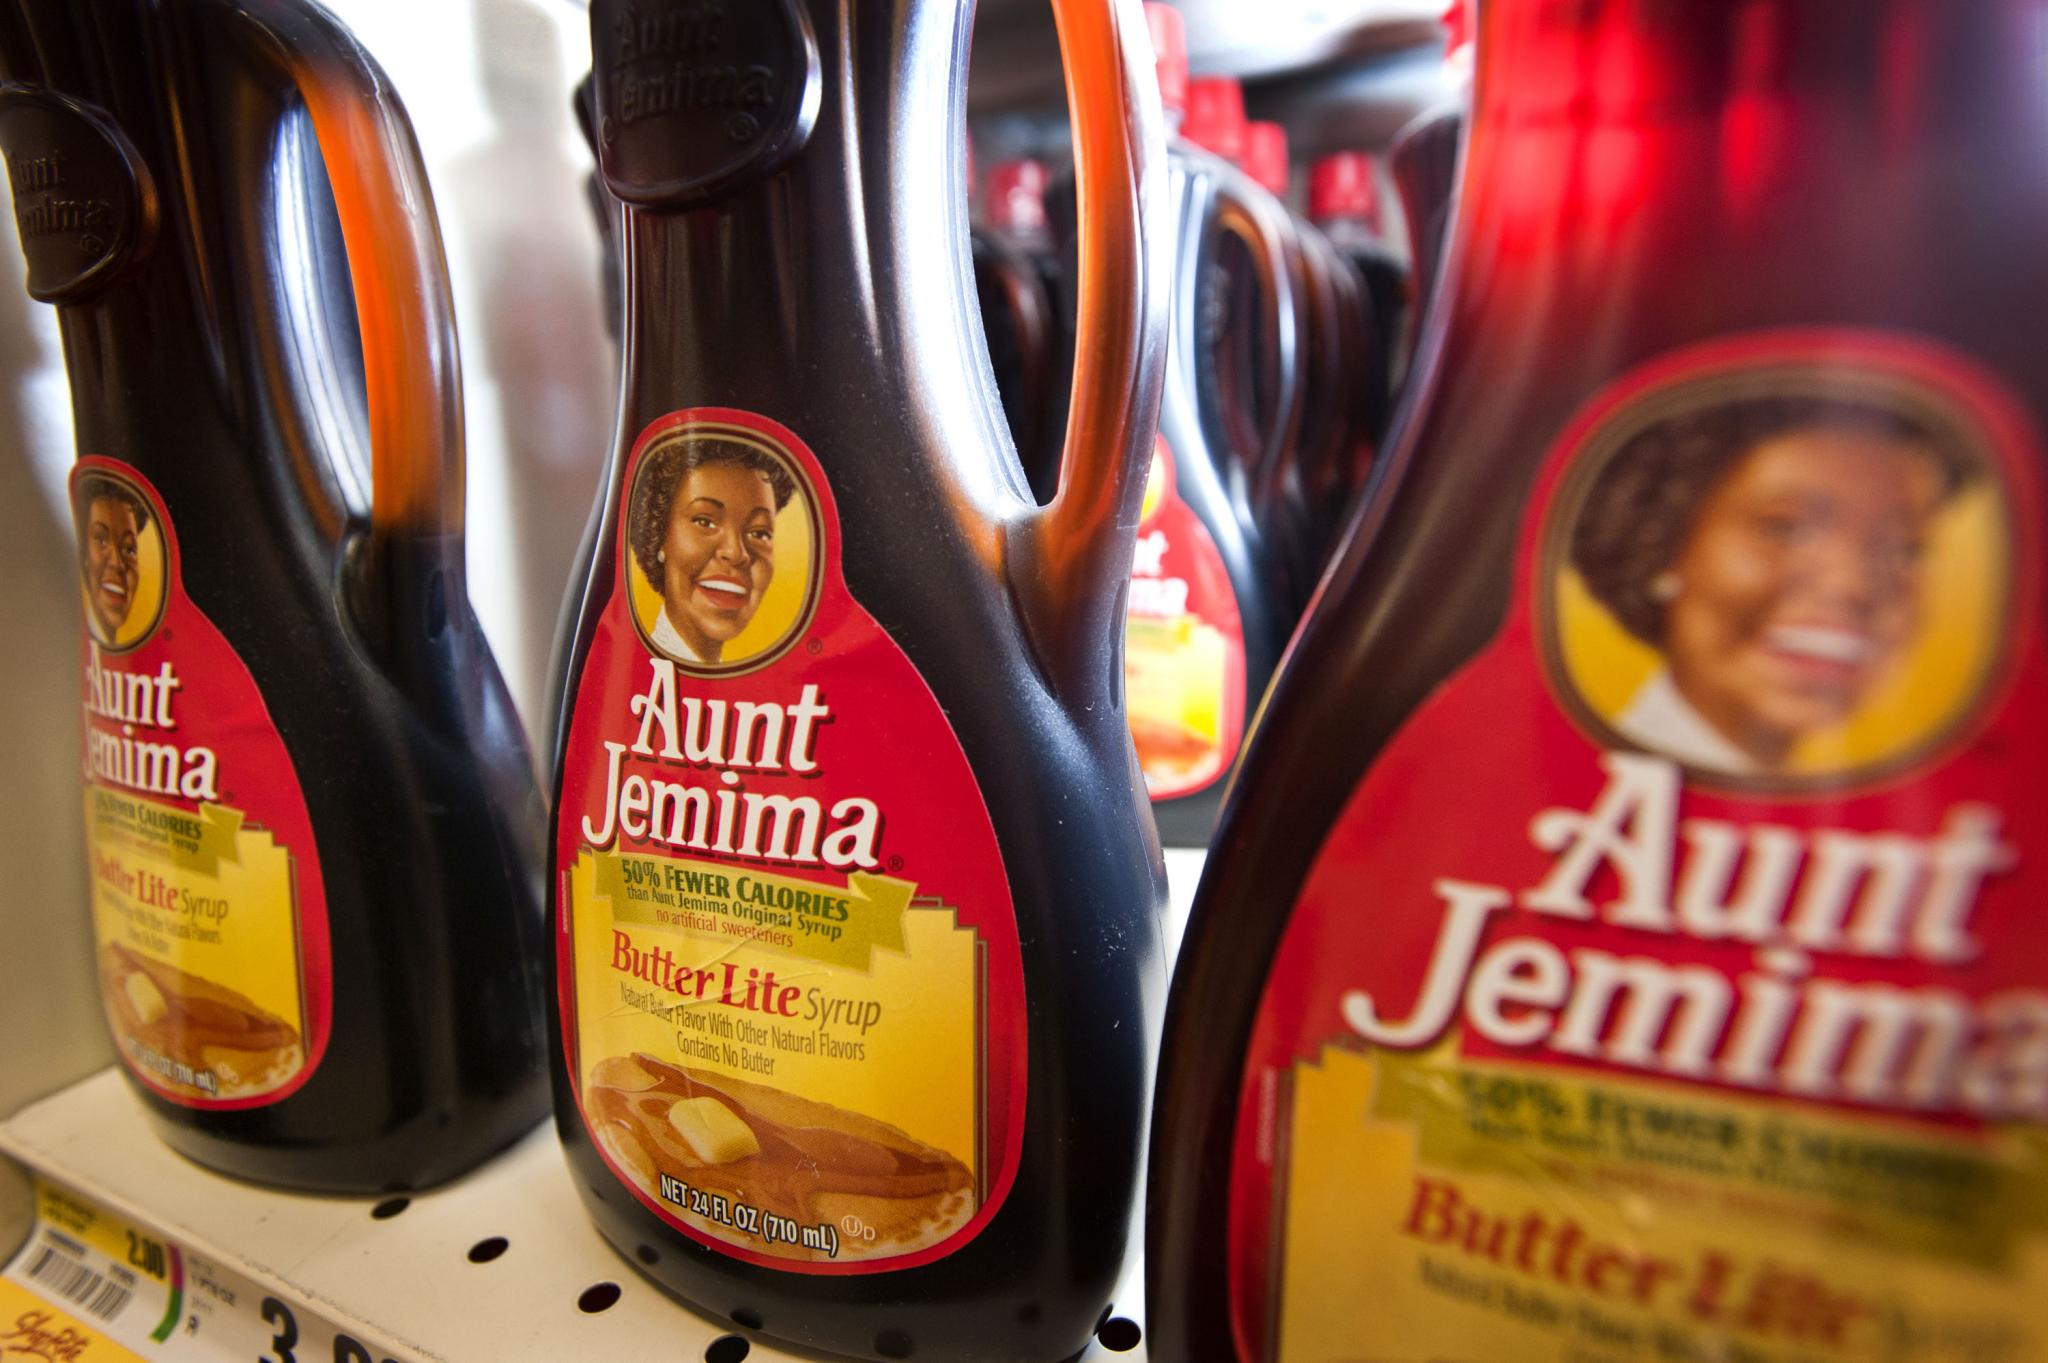 'Aunt Jemima's' Family Sues for $2 Billion in Royalties